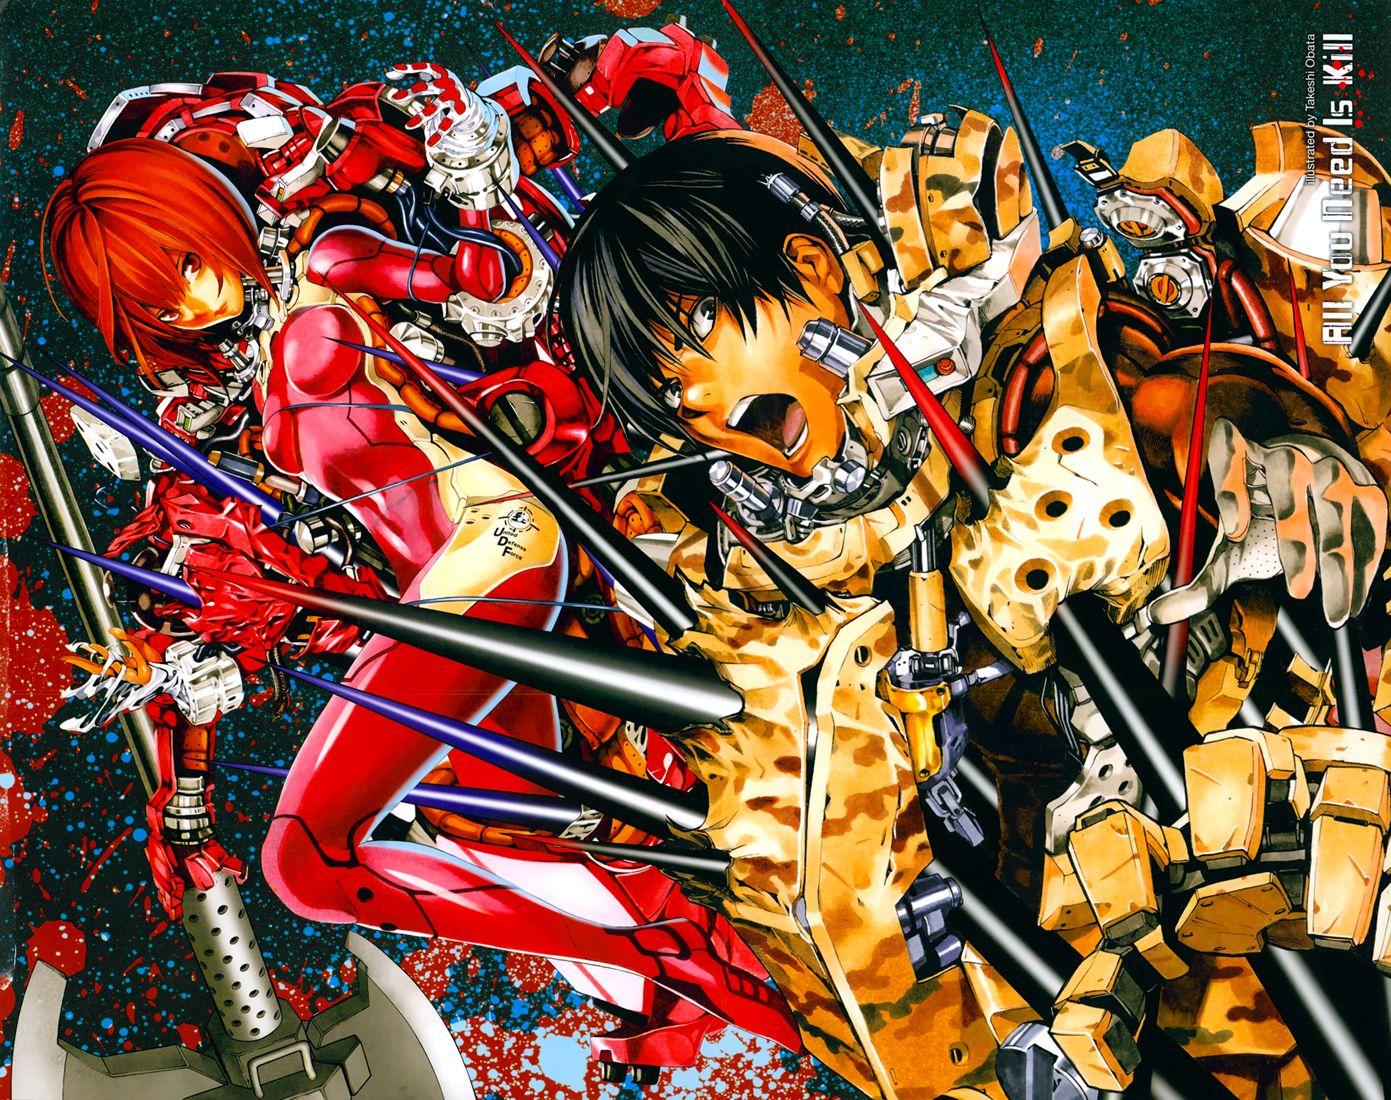 Download wallpaper from anime All You Need Is Kill with tags: PC